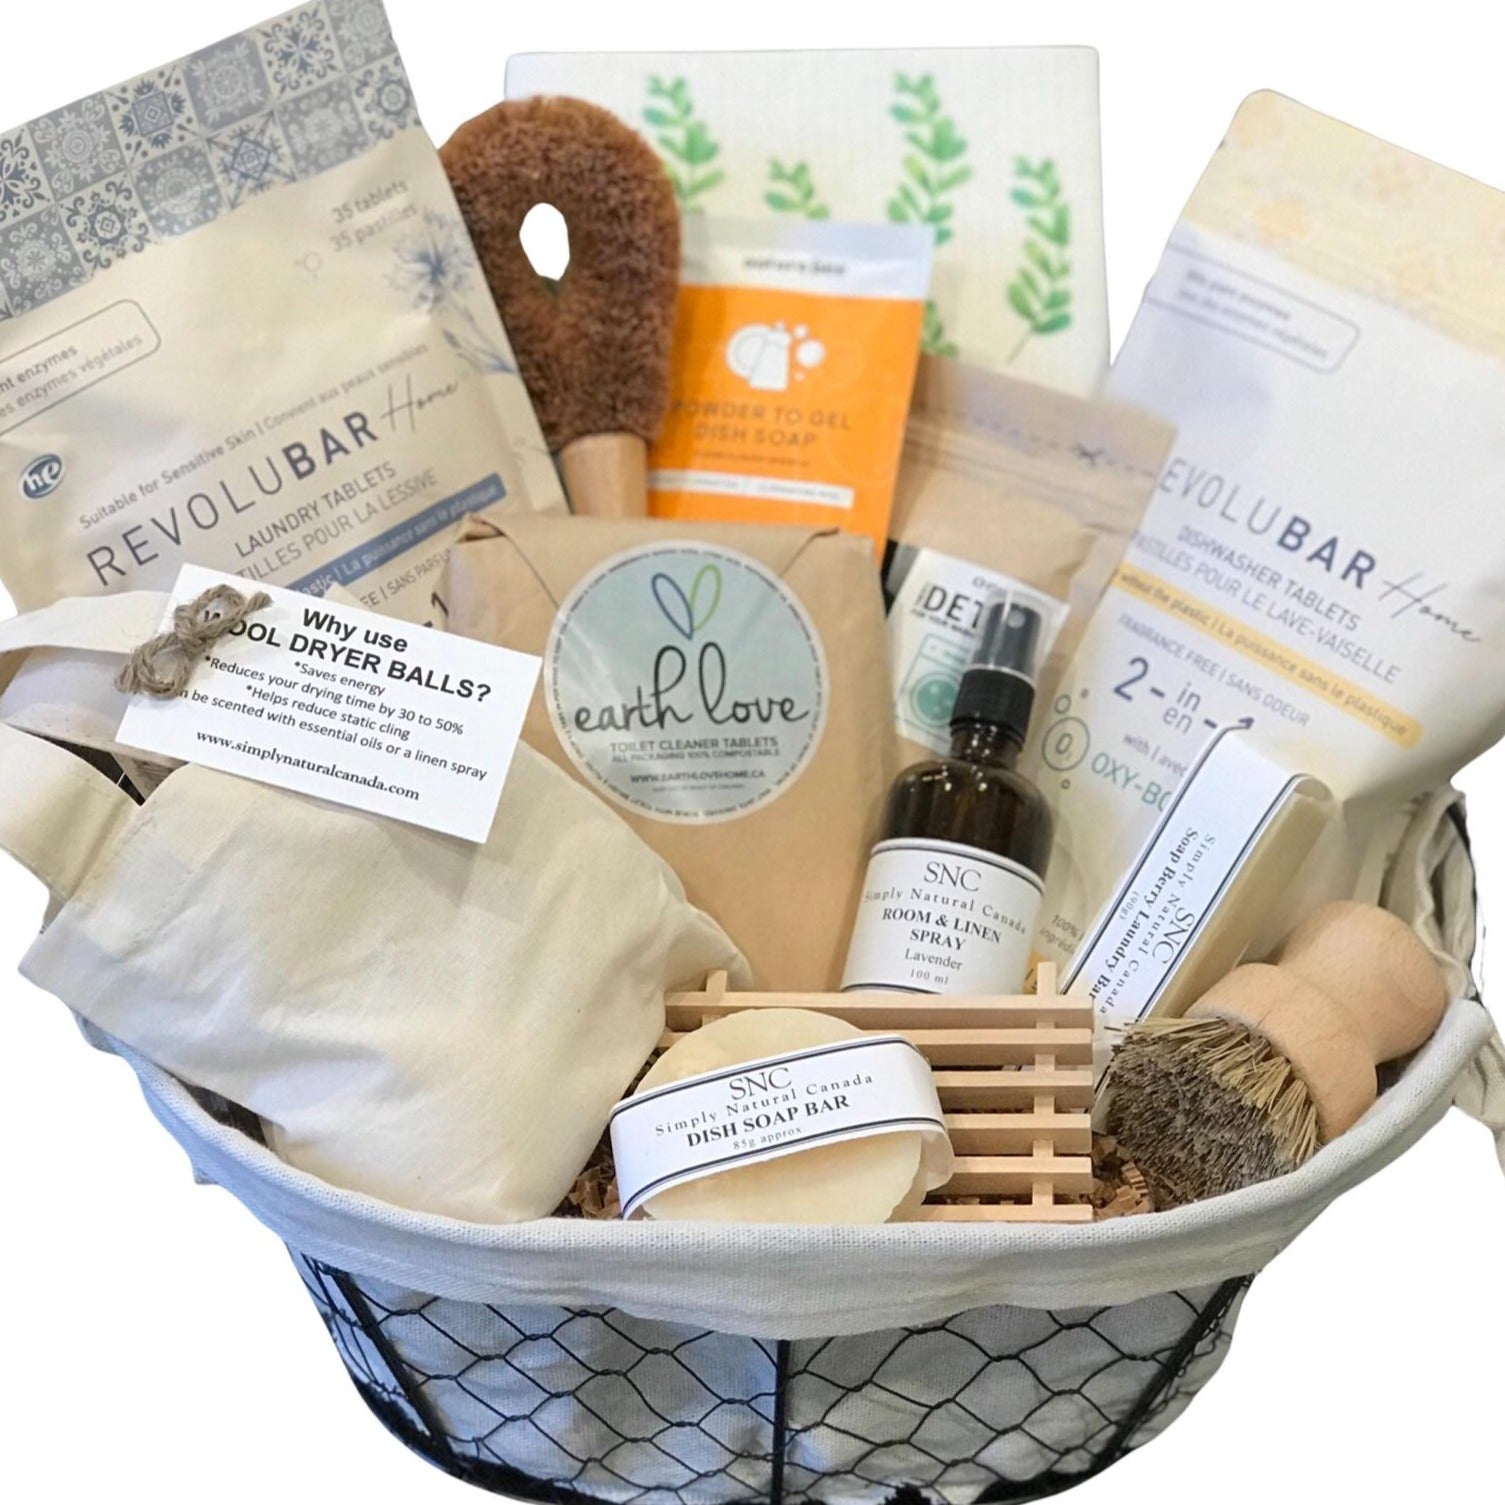 This Simply Natural Canada household gift basket full of products from Canadian sustainable brands includes a set of 3 dryer balls, laundry tablets, scouring brush, powder to gel dish soap, a Swedish  dish cloth, washing machine cleaner, dishwasher tablets, toilet cleaner tablets, lavender room and linen spray, laundry stain bar, pot scrubber brush, dish soap bar and wooden soap dish in a fabric lined black wire basket